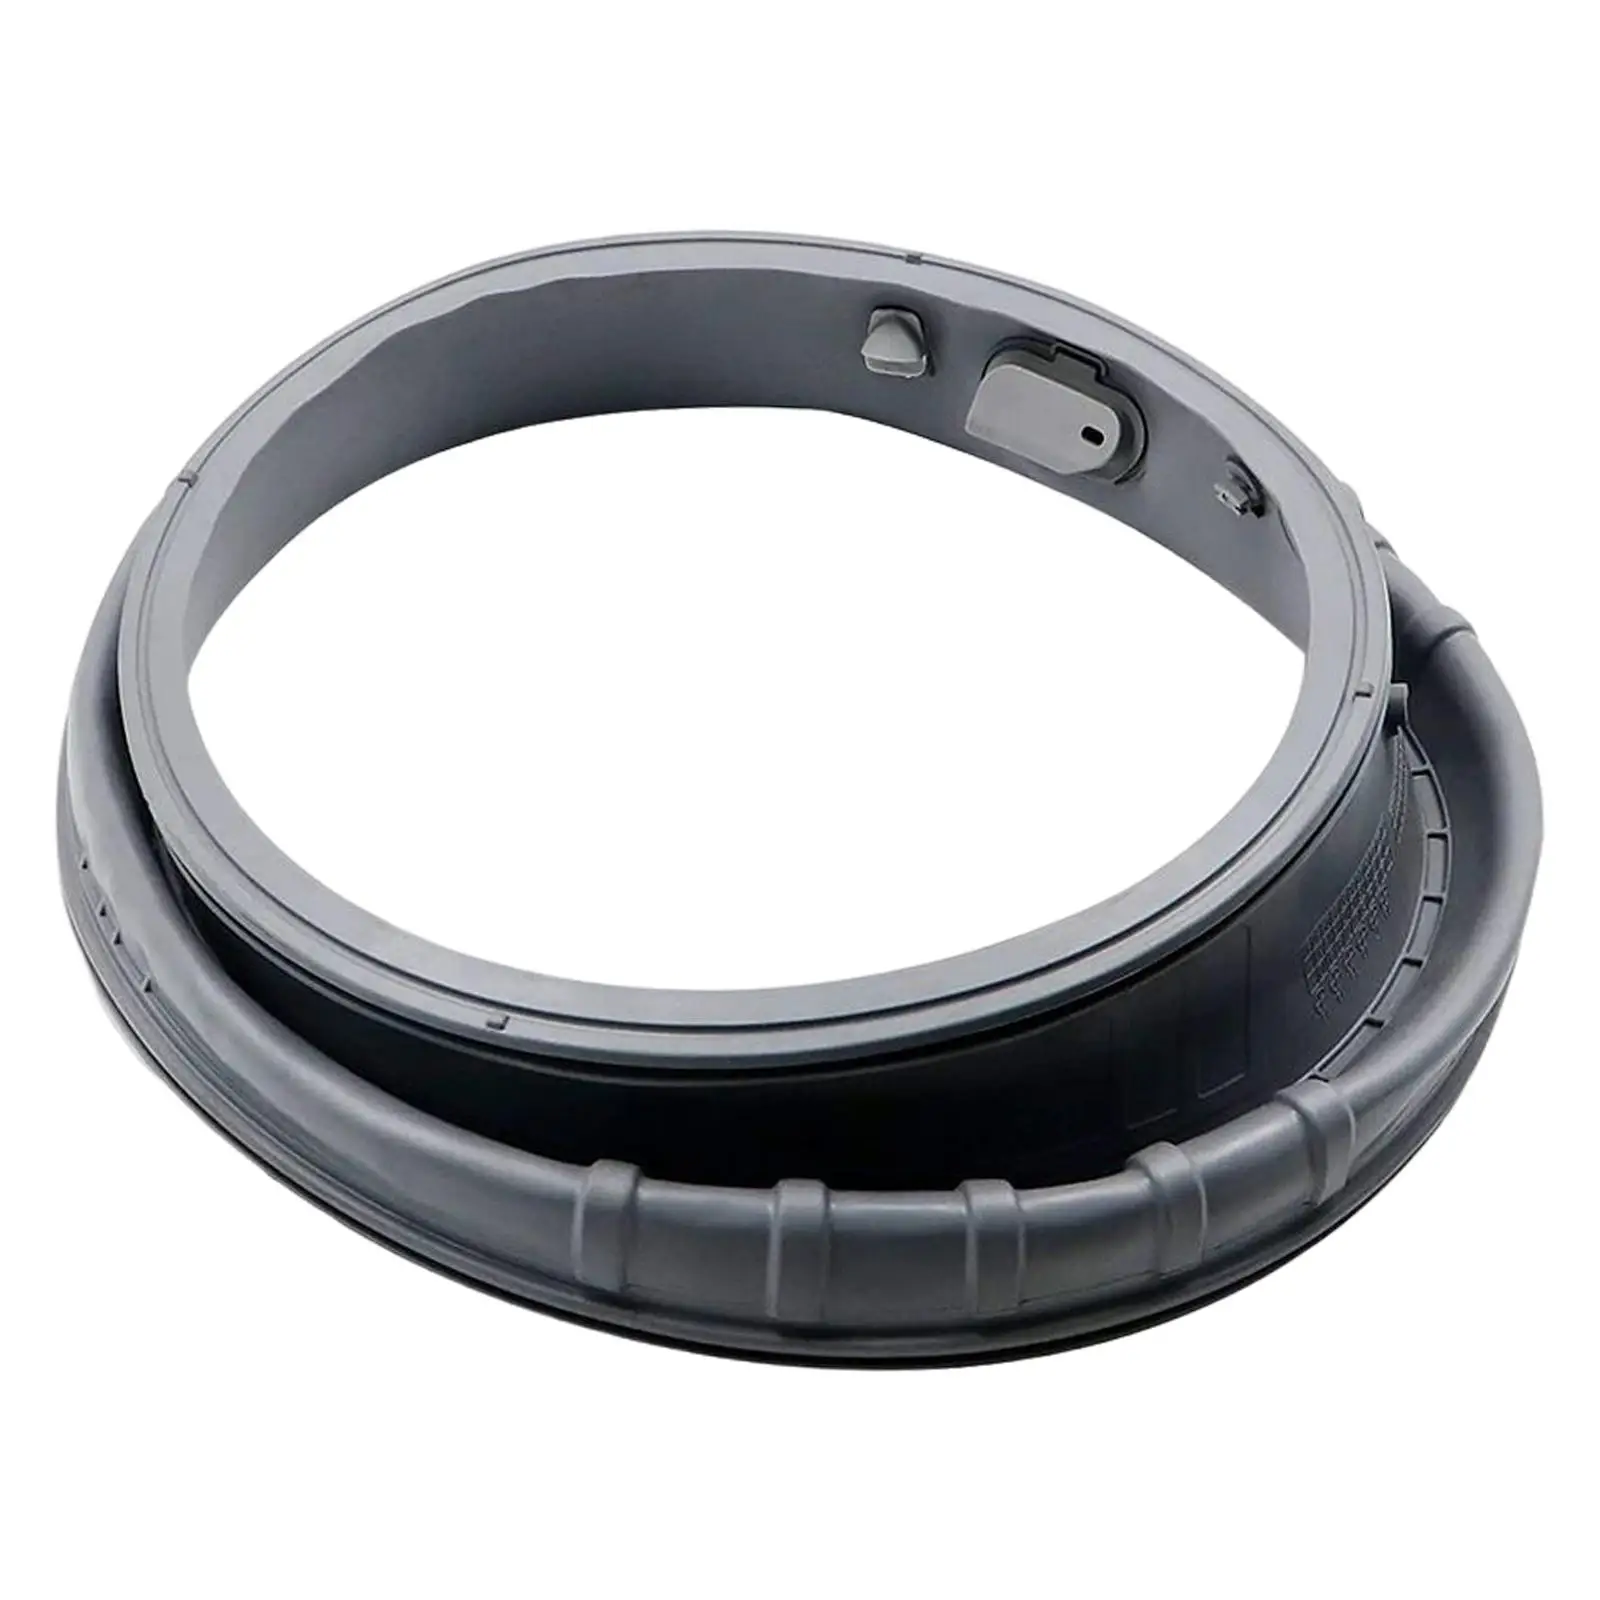 Round Door Boot Gasket Gum Material for Samsung Washers DC97-18094B AP5917067 PS9606239 Washer Repairing